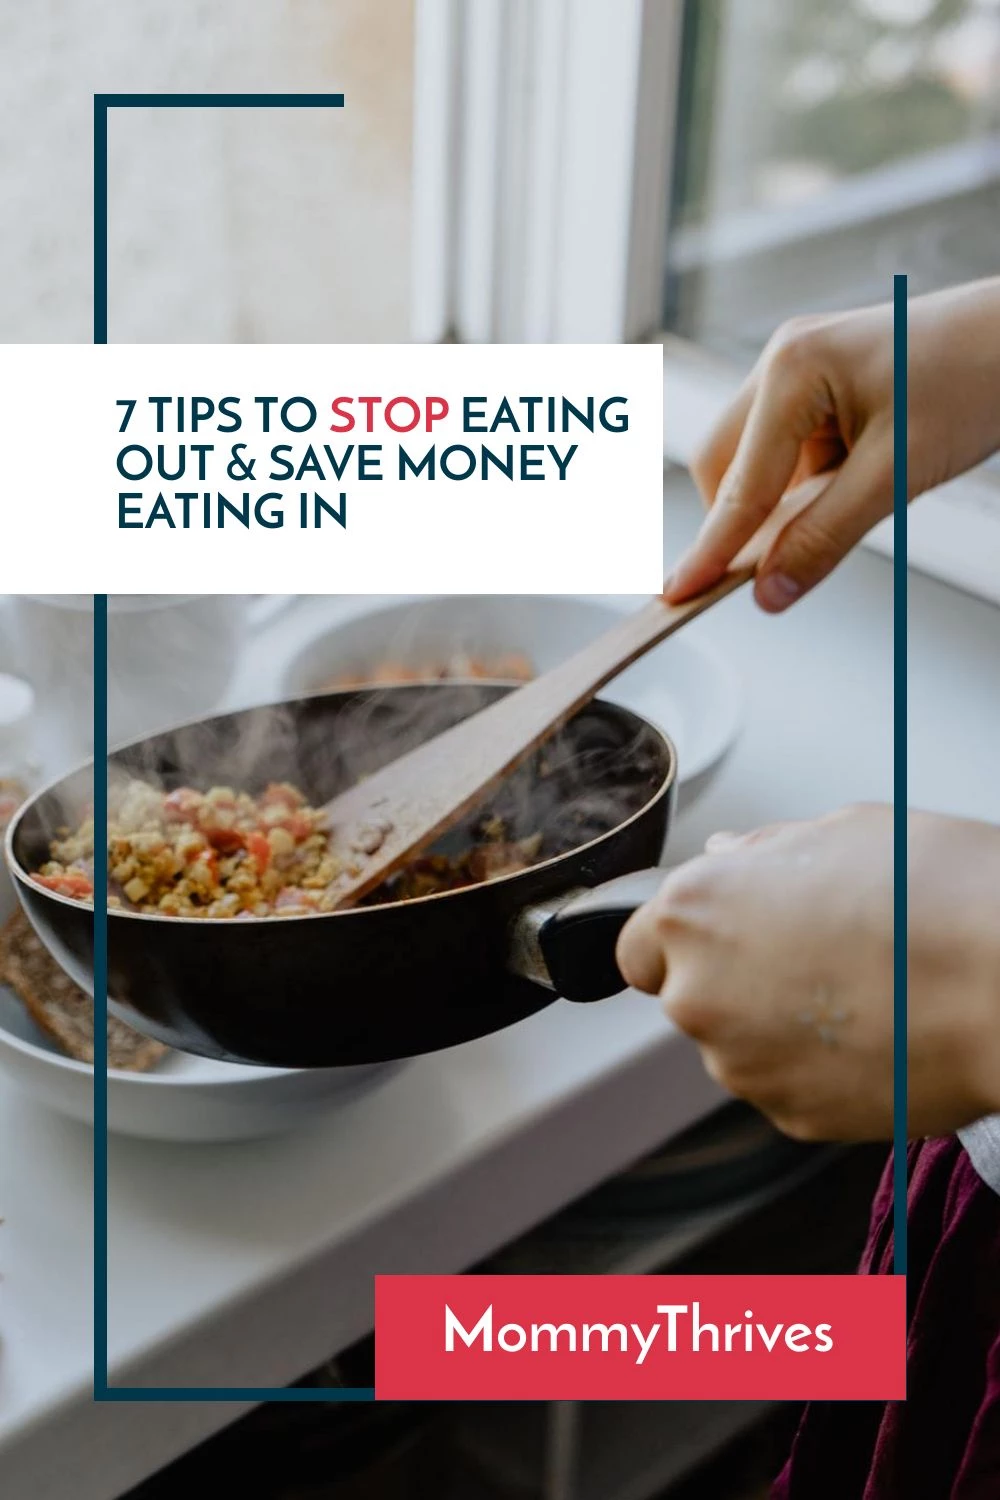 How To Eat More At Home - How To Save Money Eating At Home - Stopping The Take Out Trend